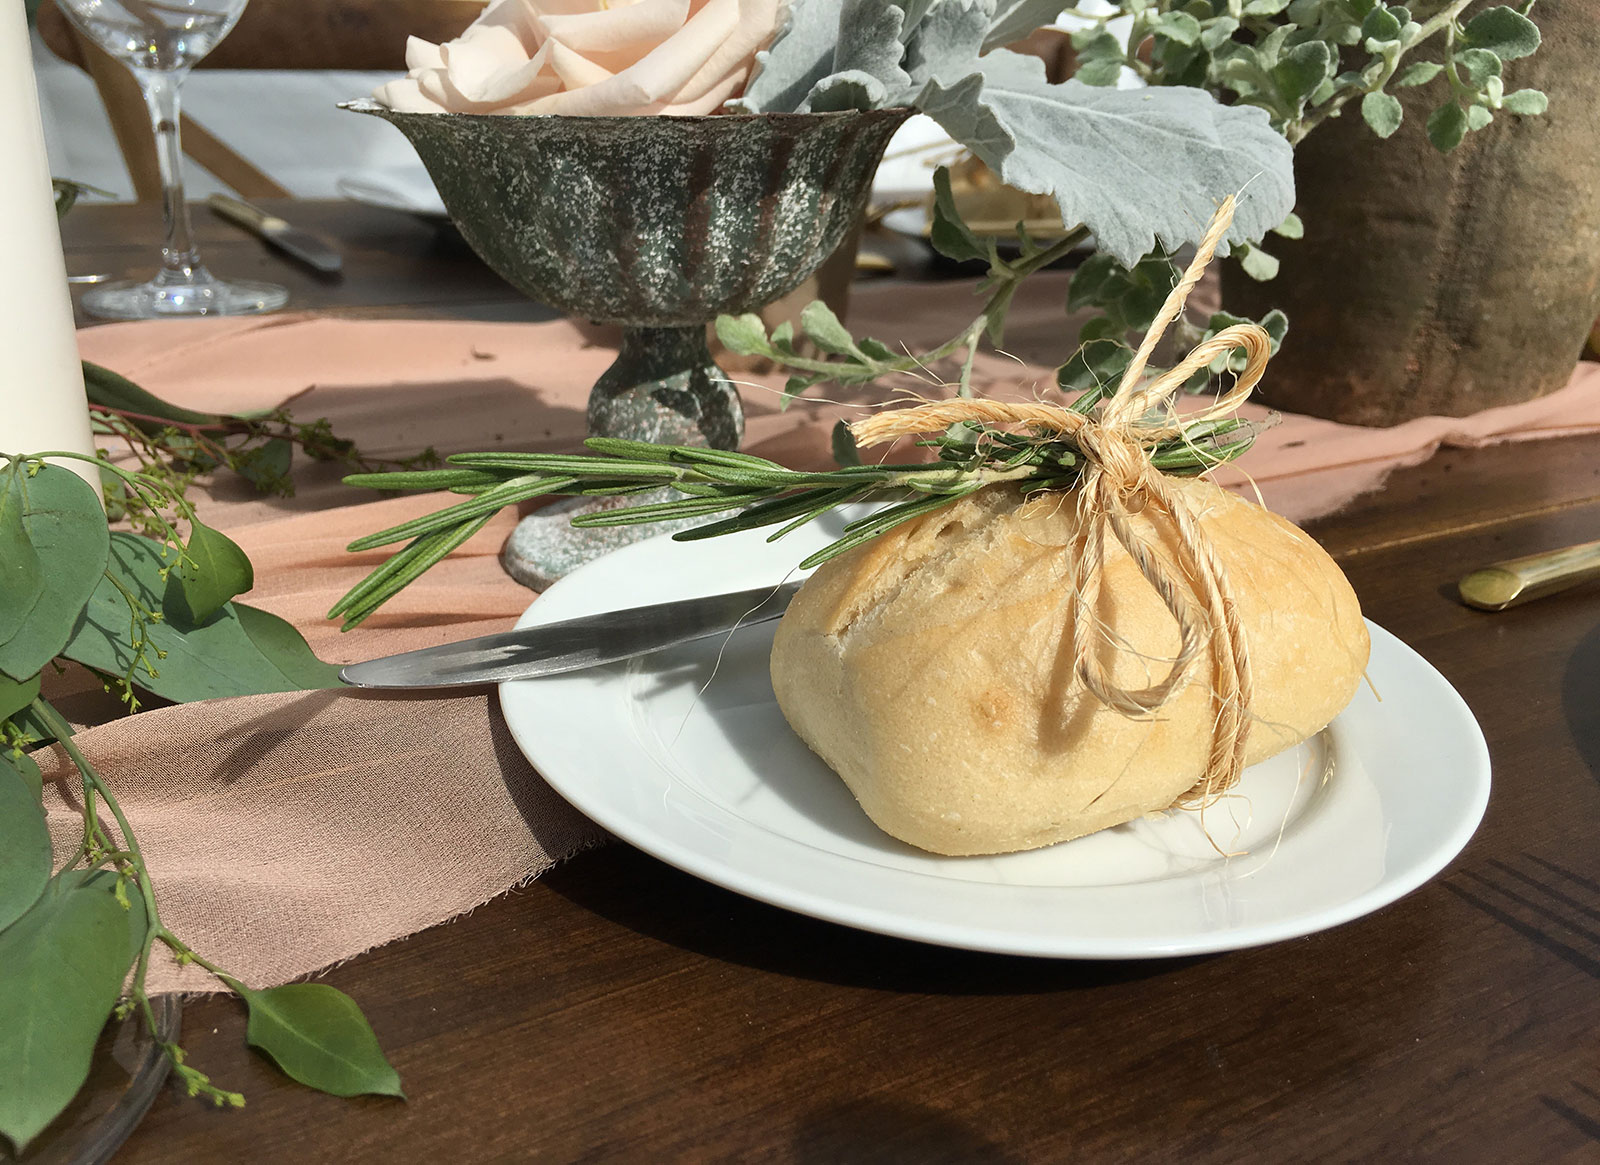 Dinner roll wrapped with rosemary and twine at Miami Seaquarium green wedding